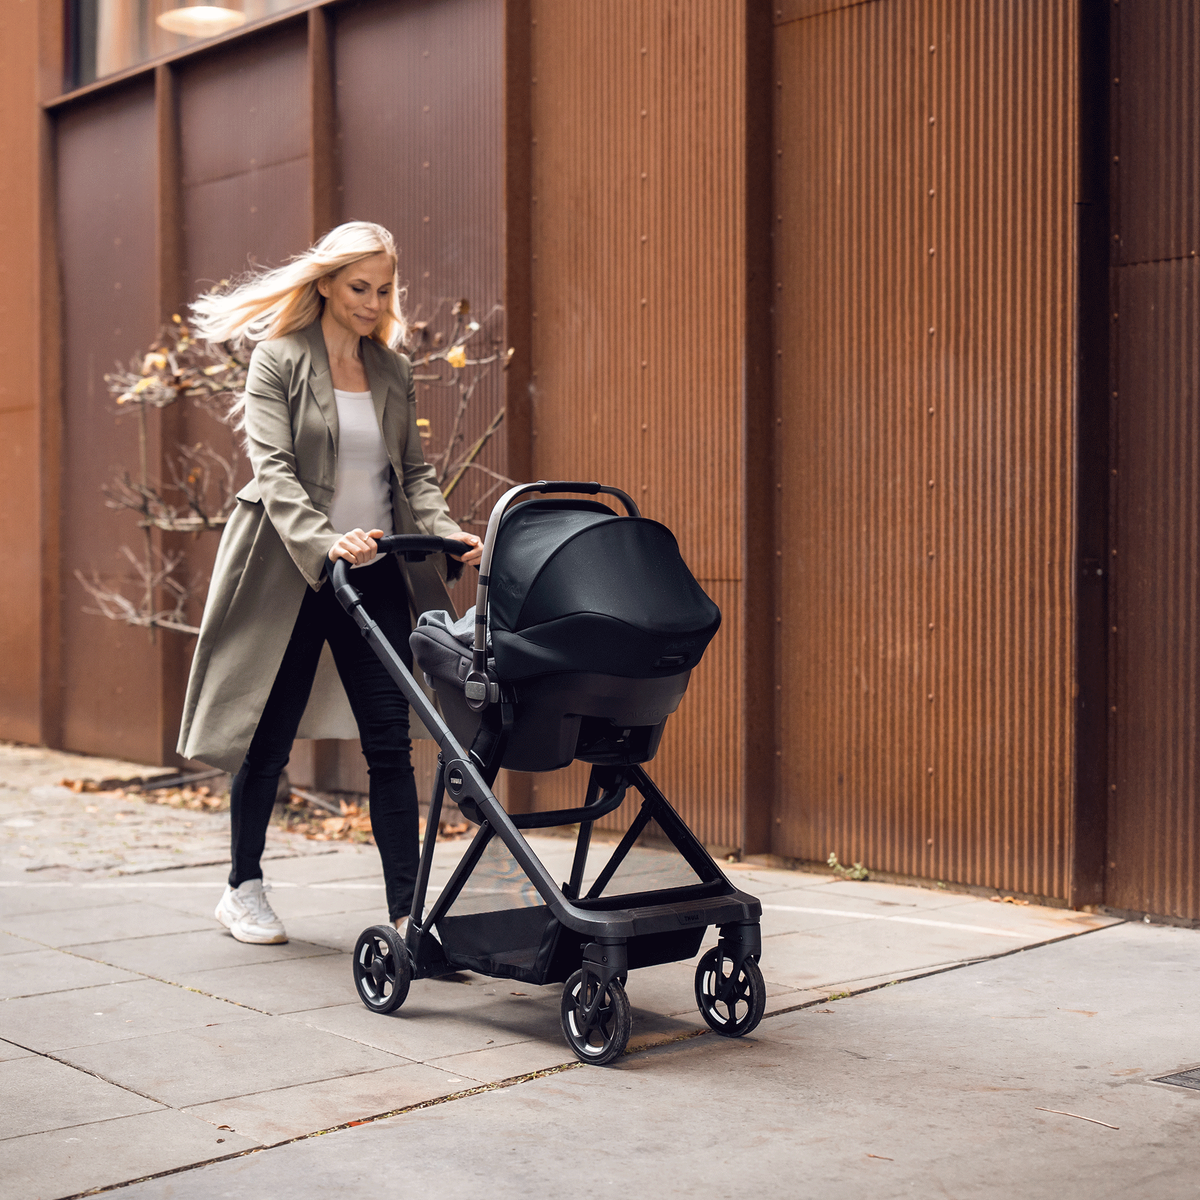 A woman walks down a rustic city street with her baby in a Thule Shine compact stroller with a car seat.